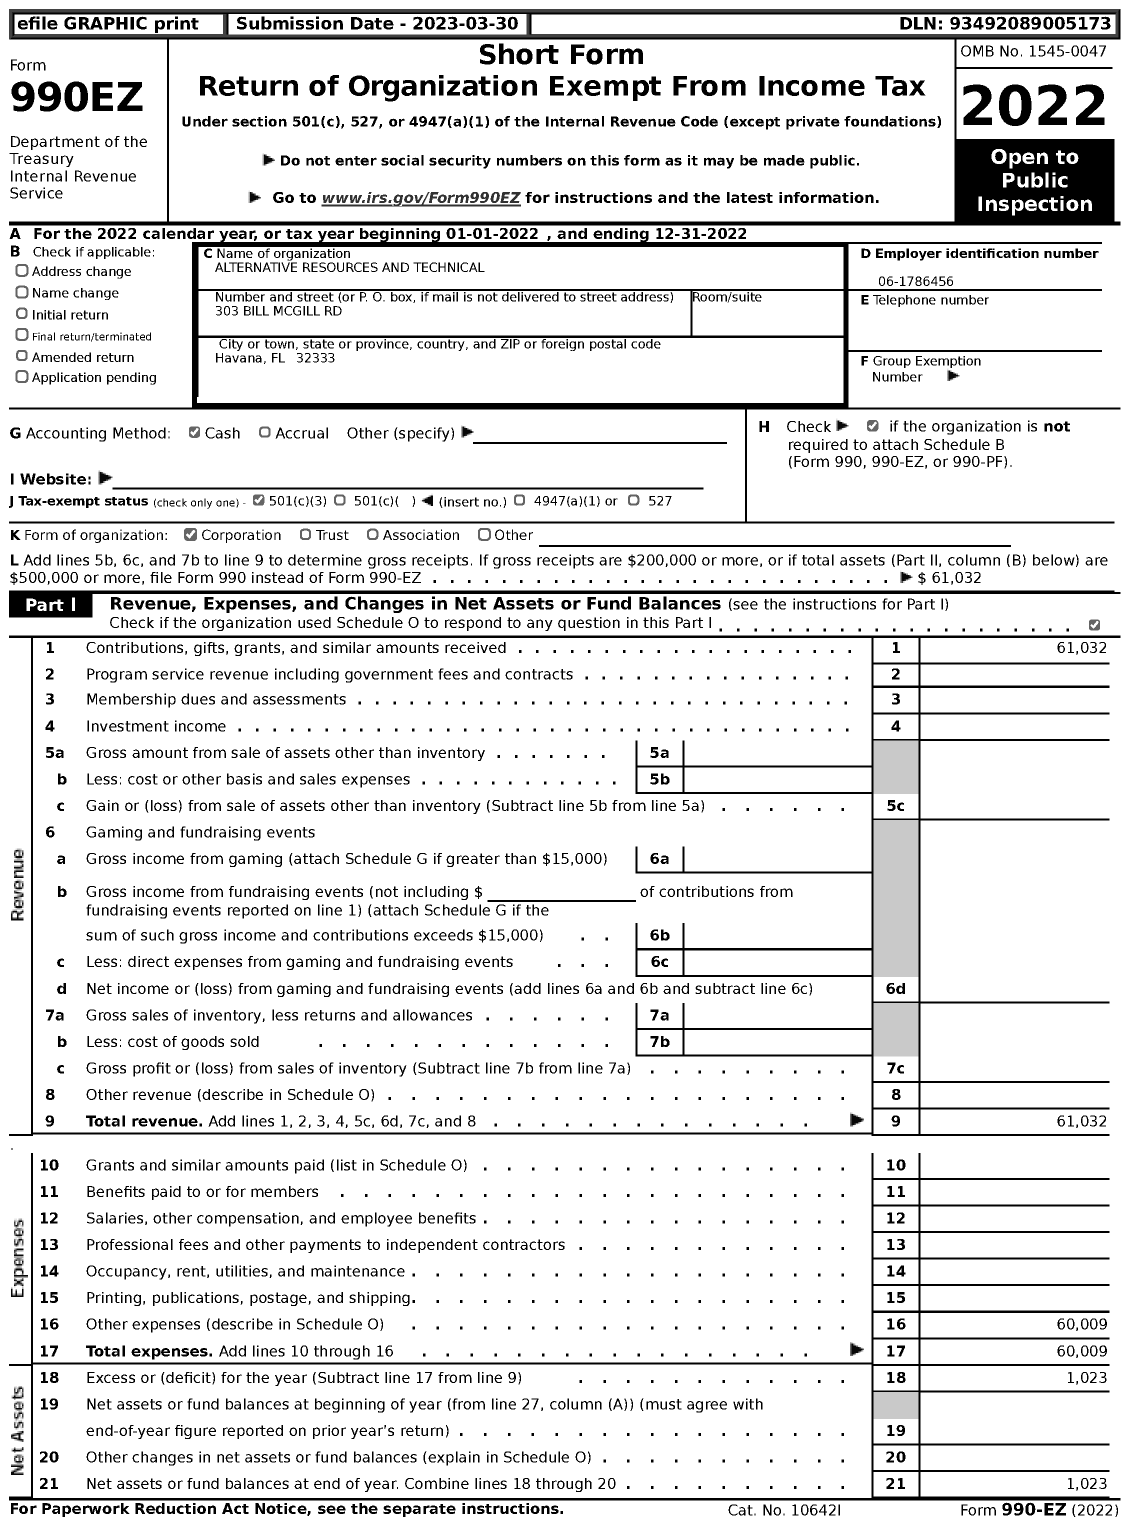 Image of first page of 2022 Form 990EZ for Alternative Resources and Technical